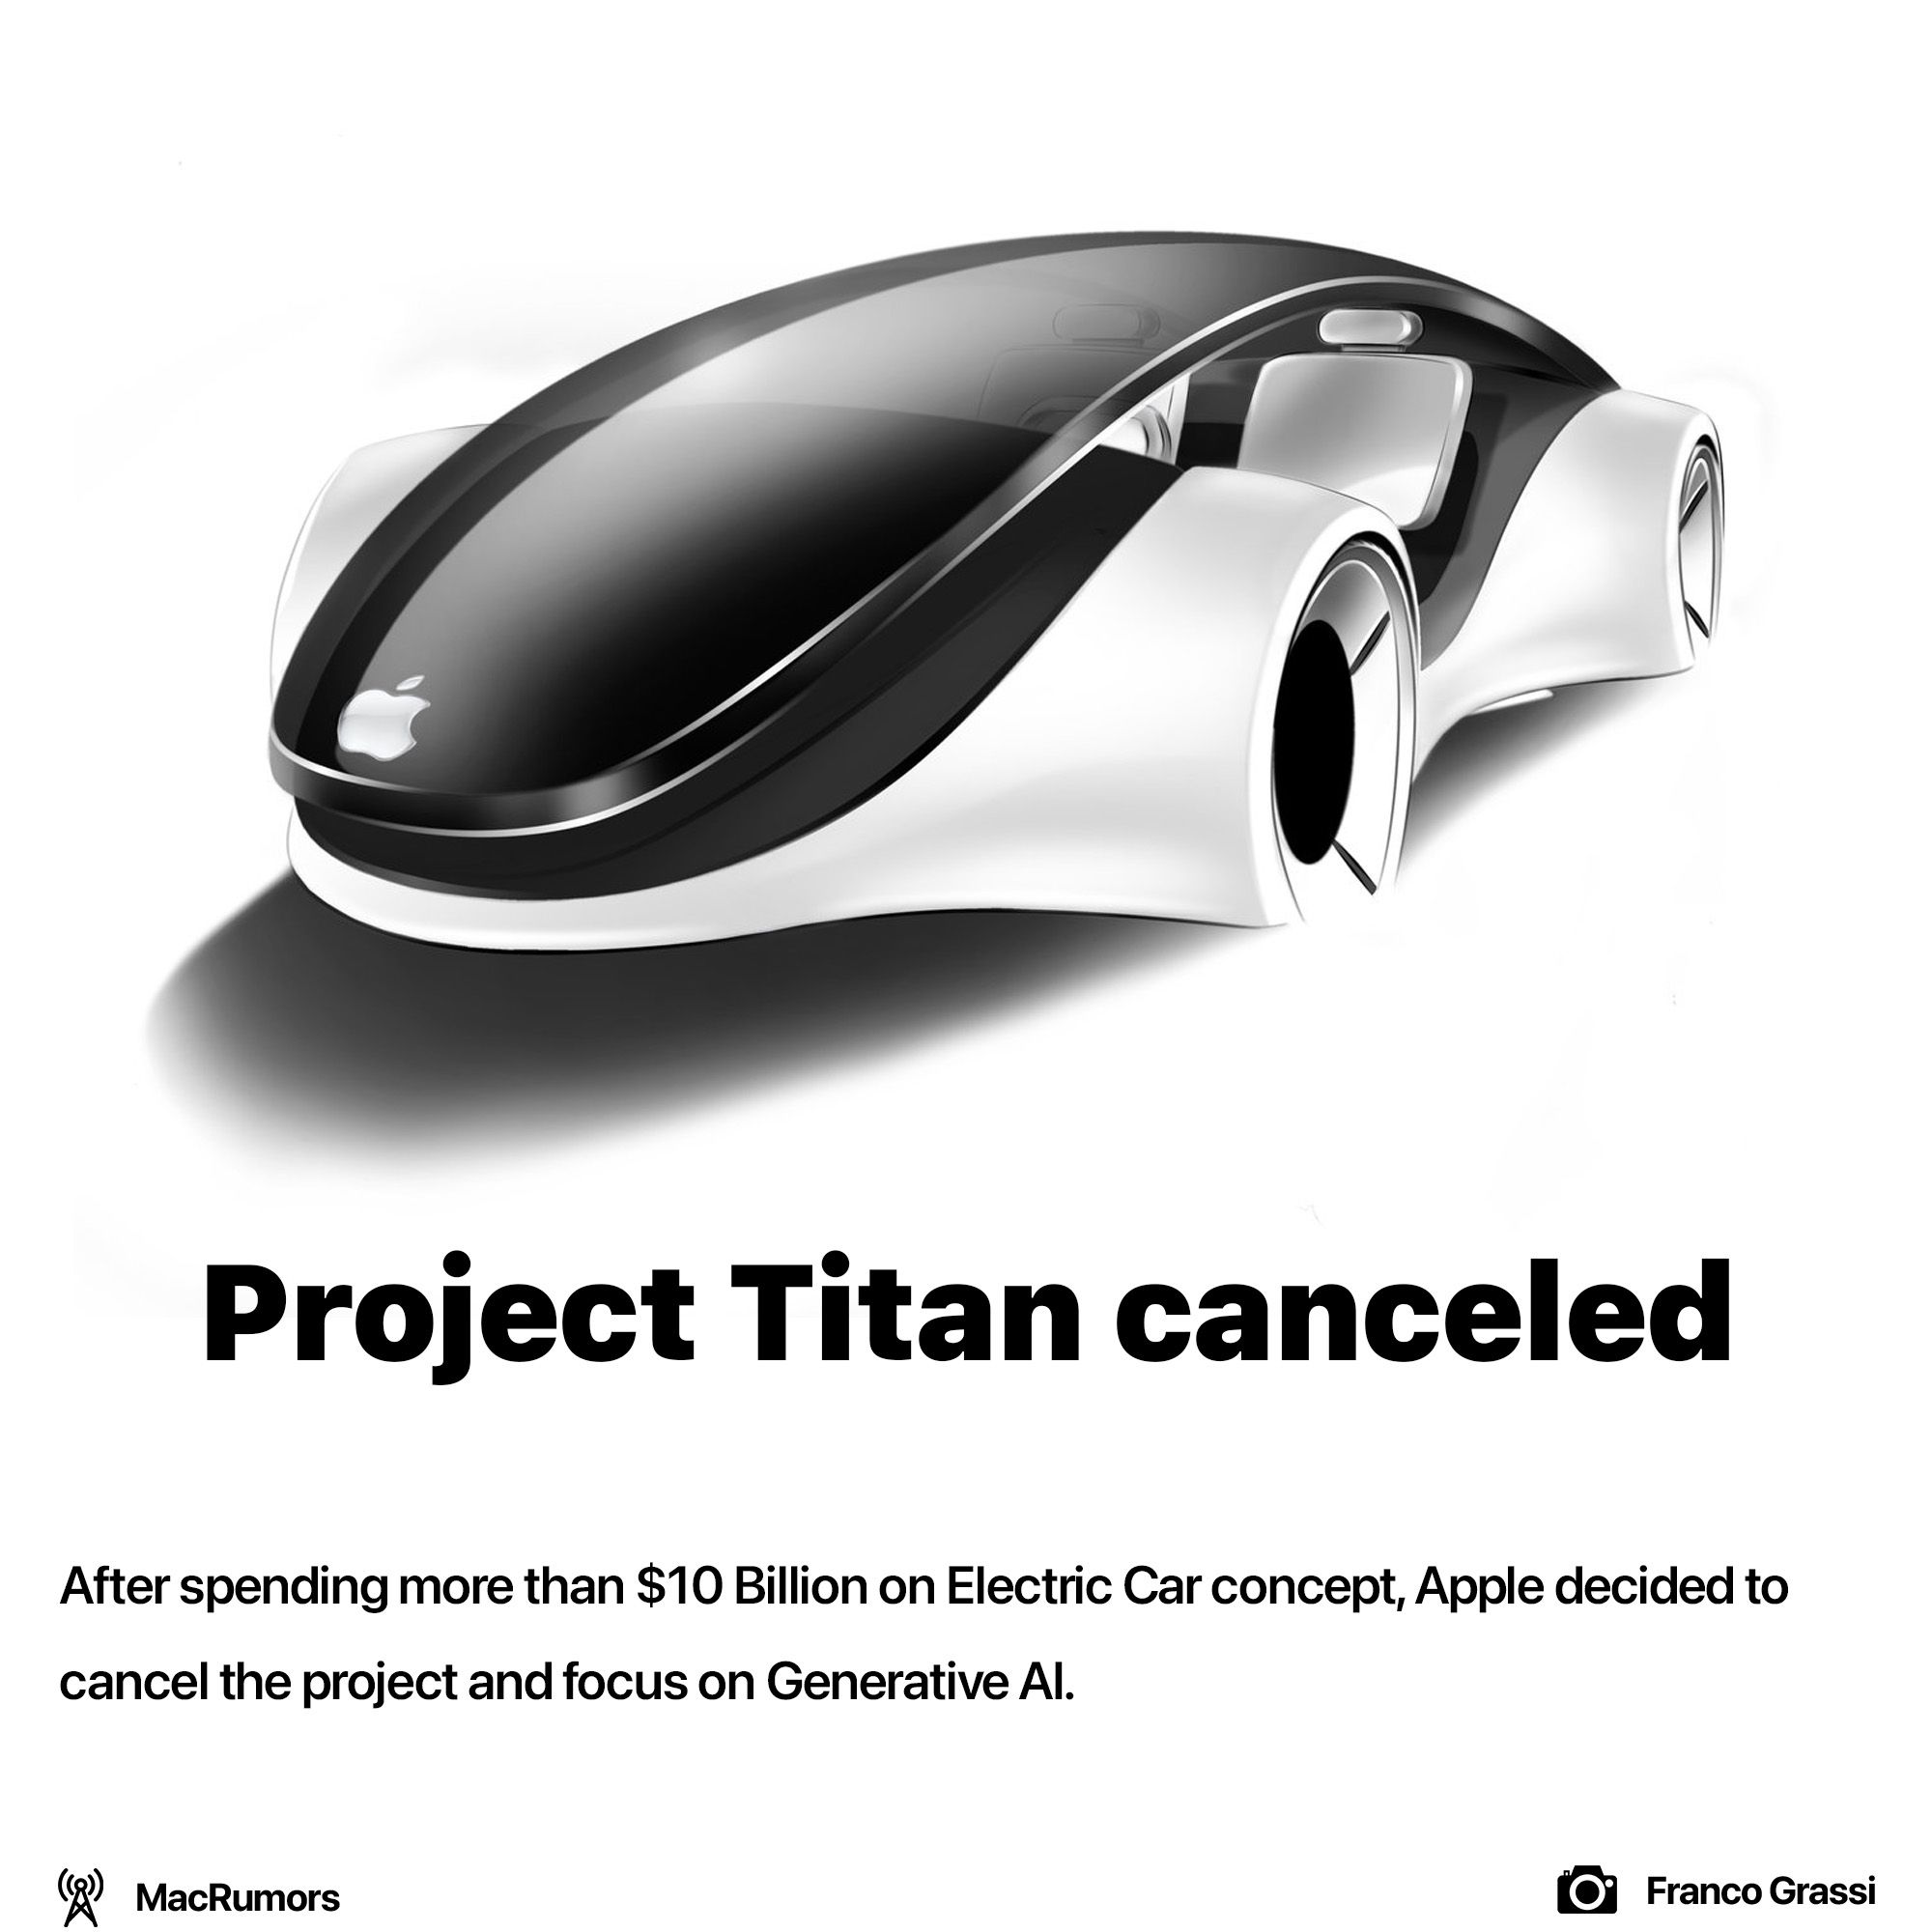 Apple canceled their Electric Car project